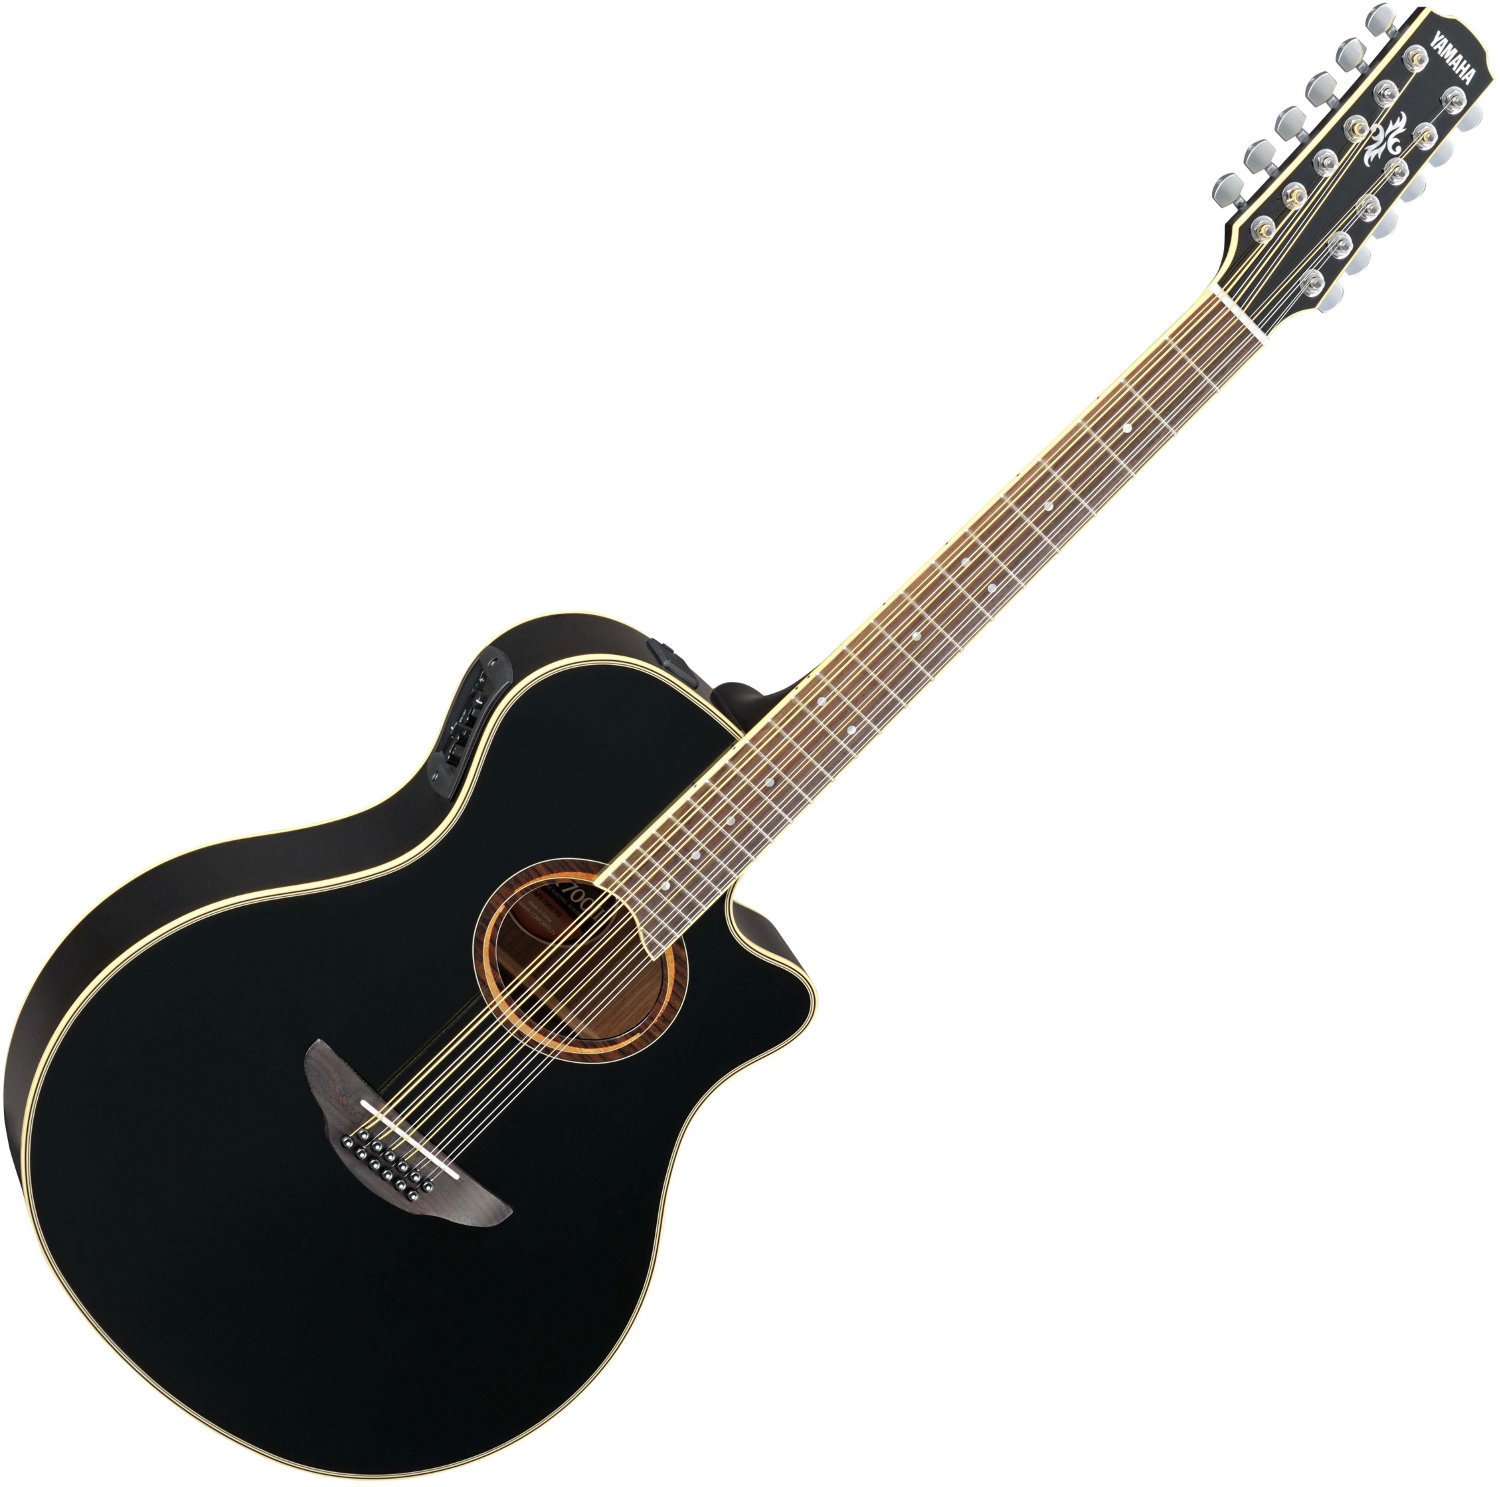 12-string Acoustic-electric Guitar Yamaha APX700II-12 Black